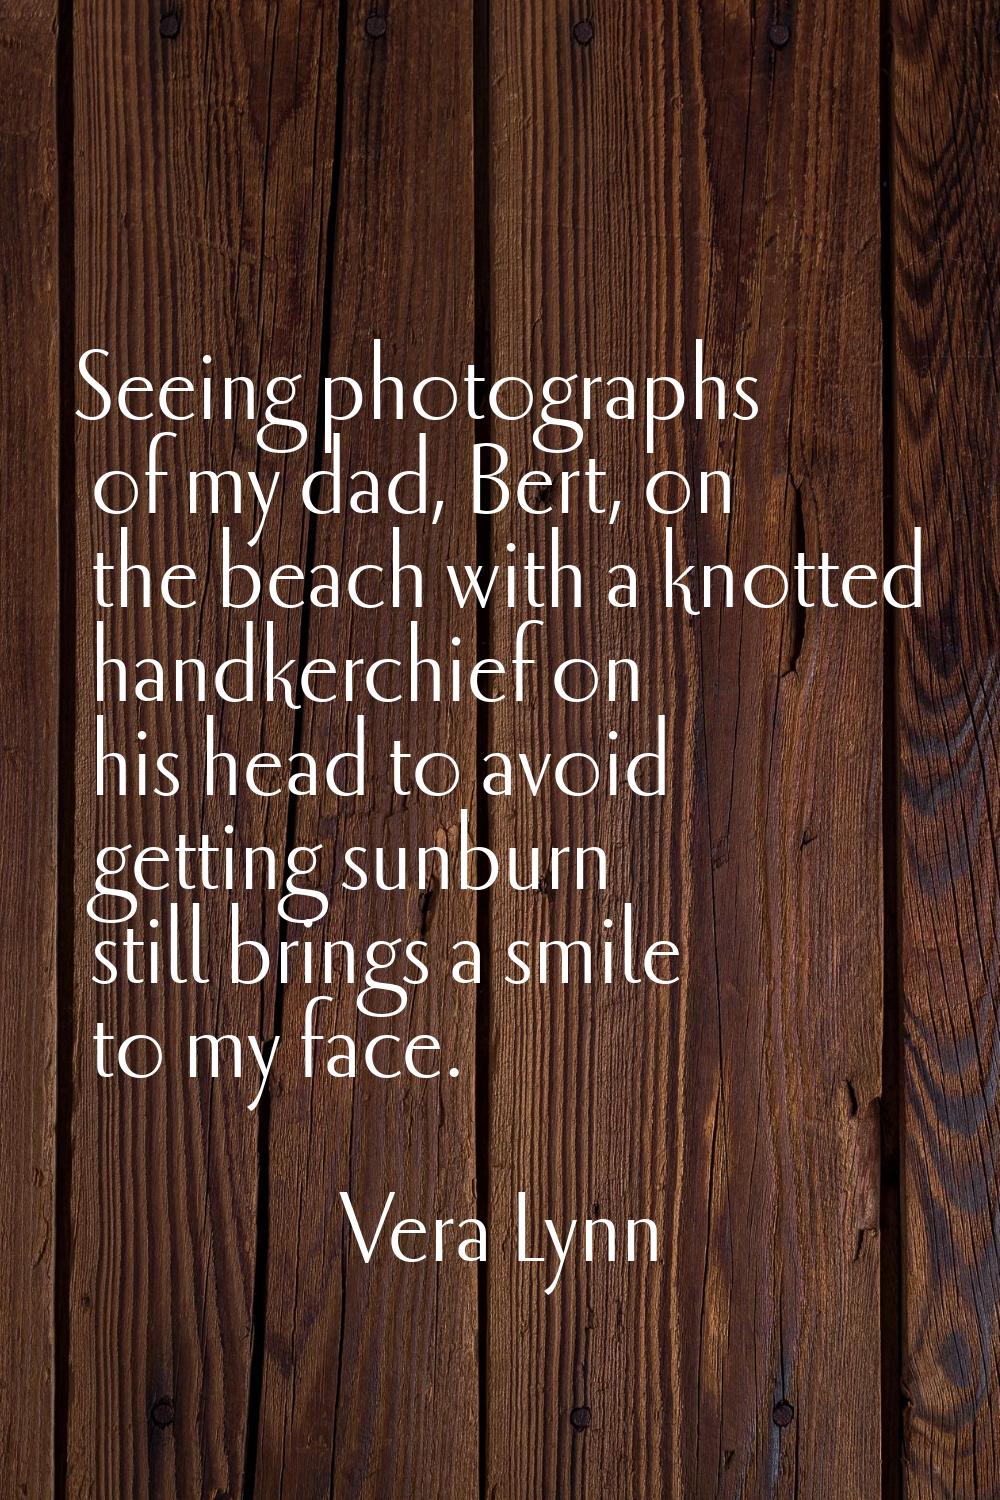 Seeing photographs of my dad, Bert, on the beach with a knotted handkerchief on his head to avoid g